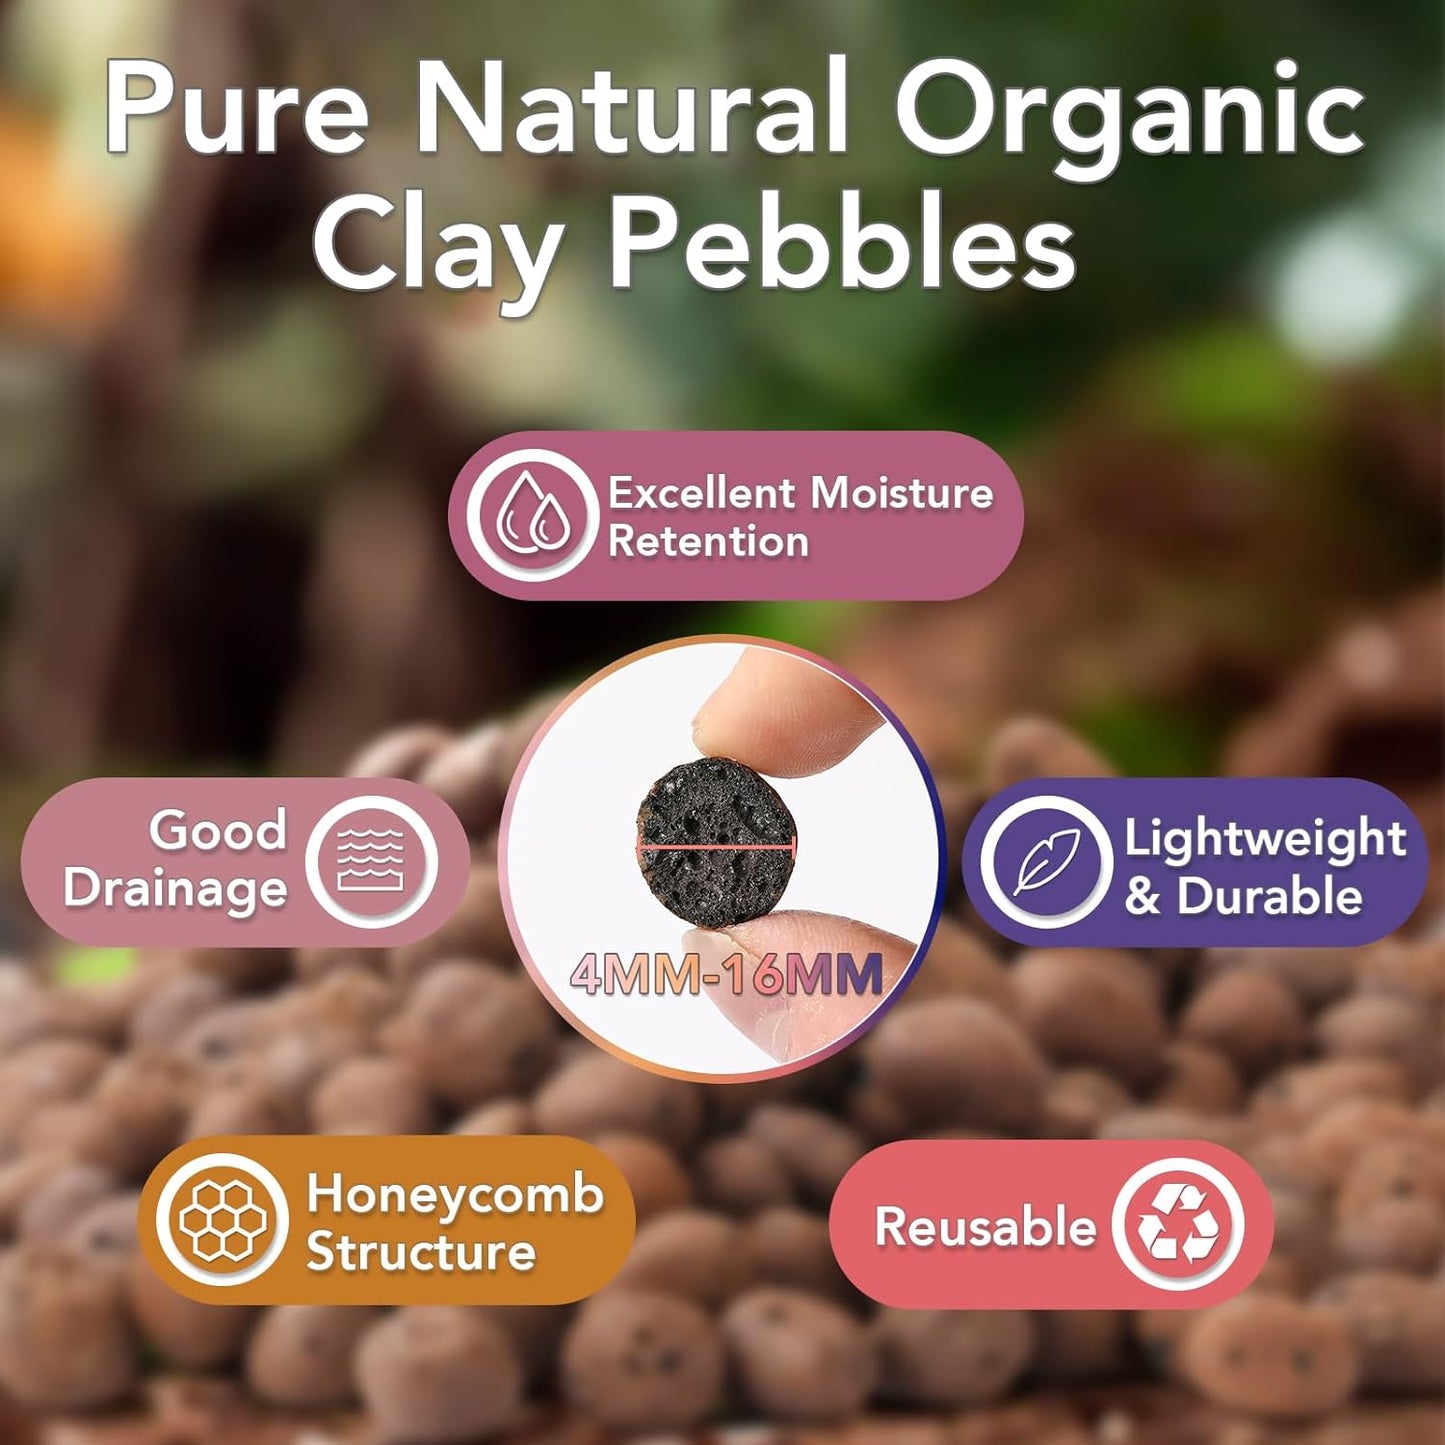 10 LBS Organic Clay Pebbles 4Mm-16Mm Leca for Plants 100% Natural Hydroton Clay Pebbles for Hydroponic Growing Gardening Orchids Drainage Decoration Aquaponics